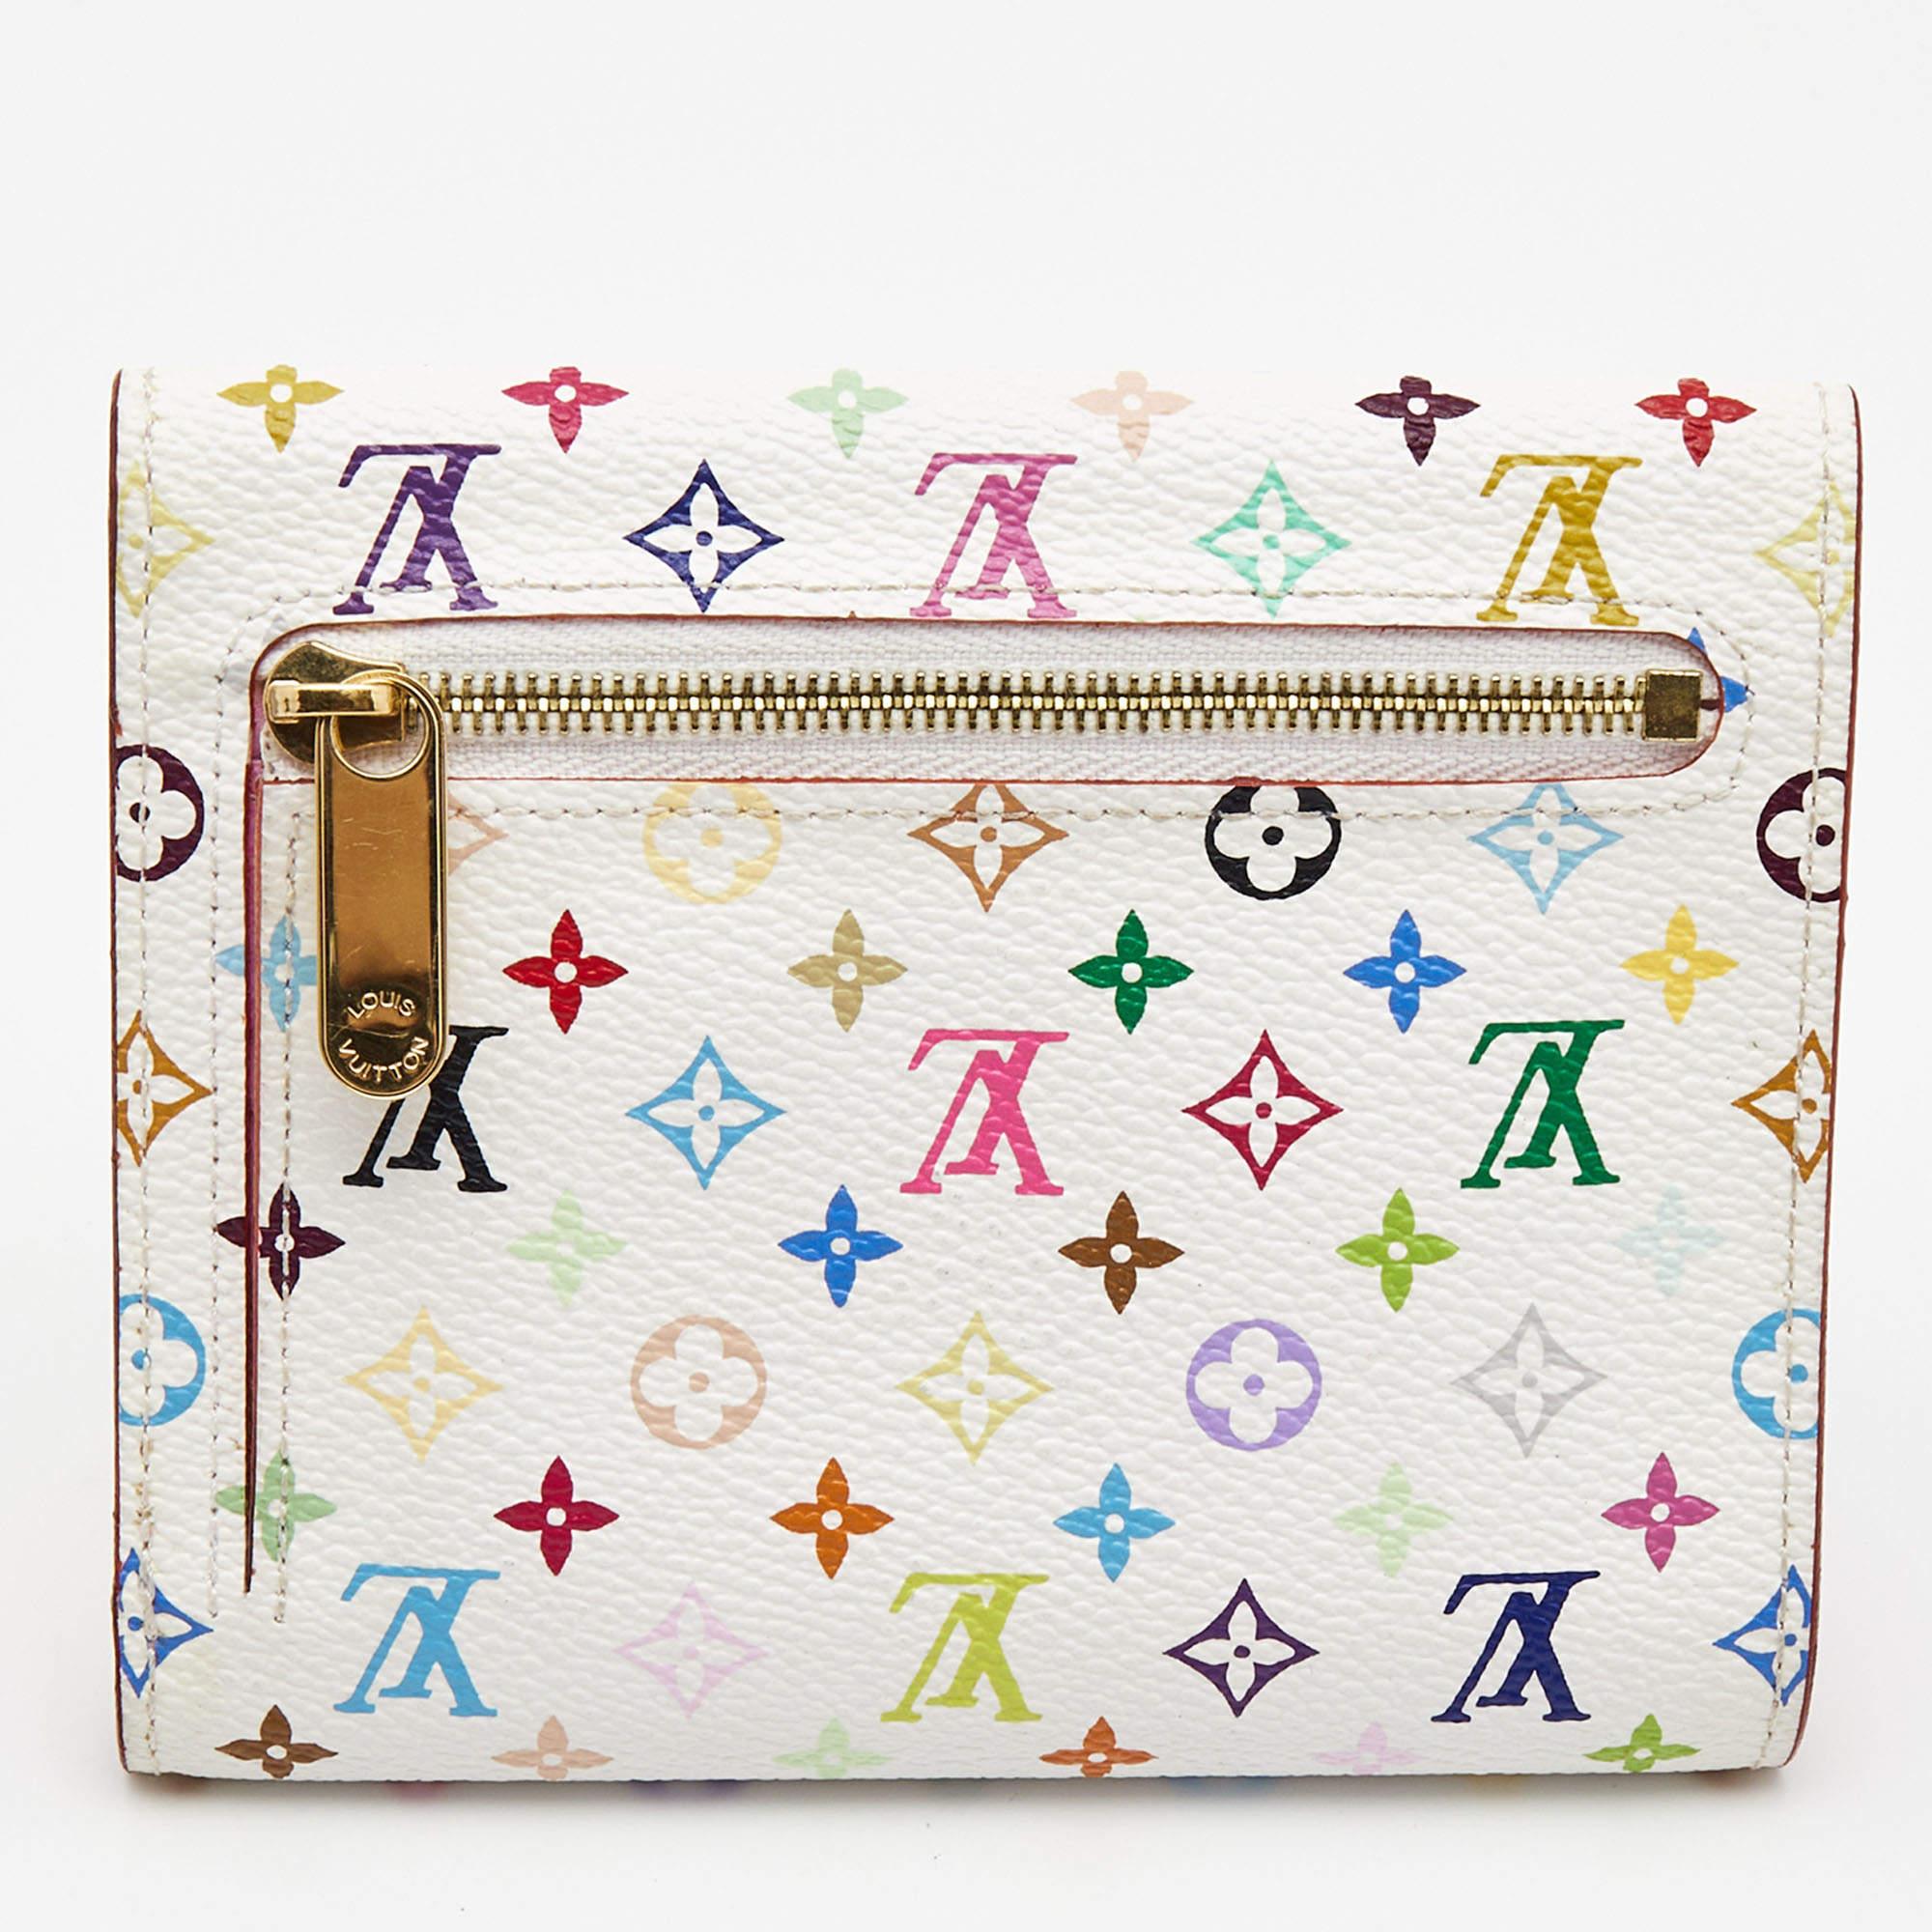 Take this chic and functional wallet by Louis Vuitton everywhere. Made from signature Multicolore Monogram canvas, this Joey wallet is accented with a gold-tone closure in the front. The easy to organize interior is lined with leather and features